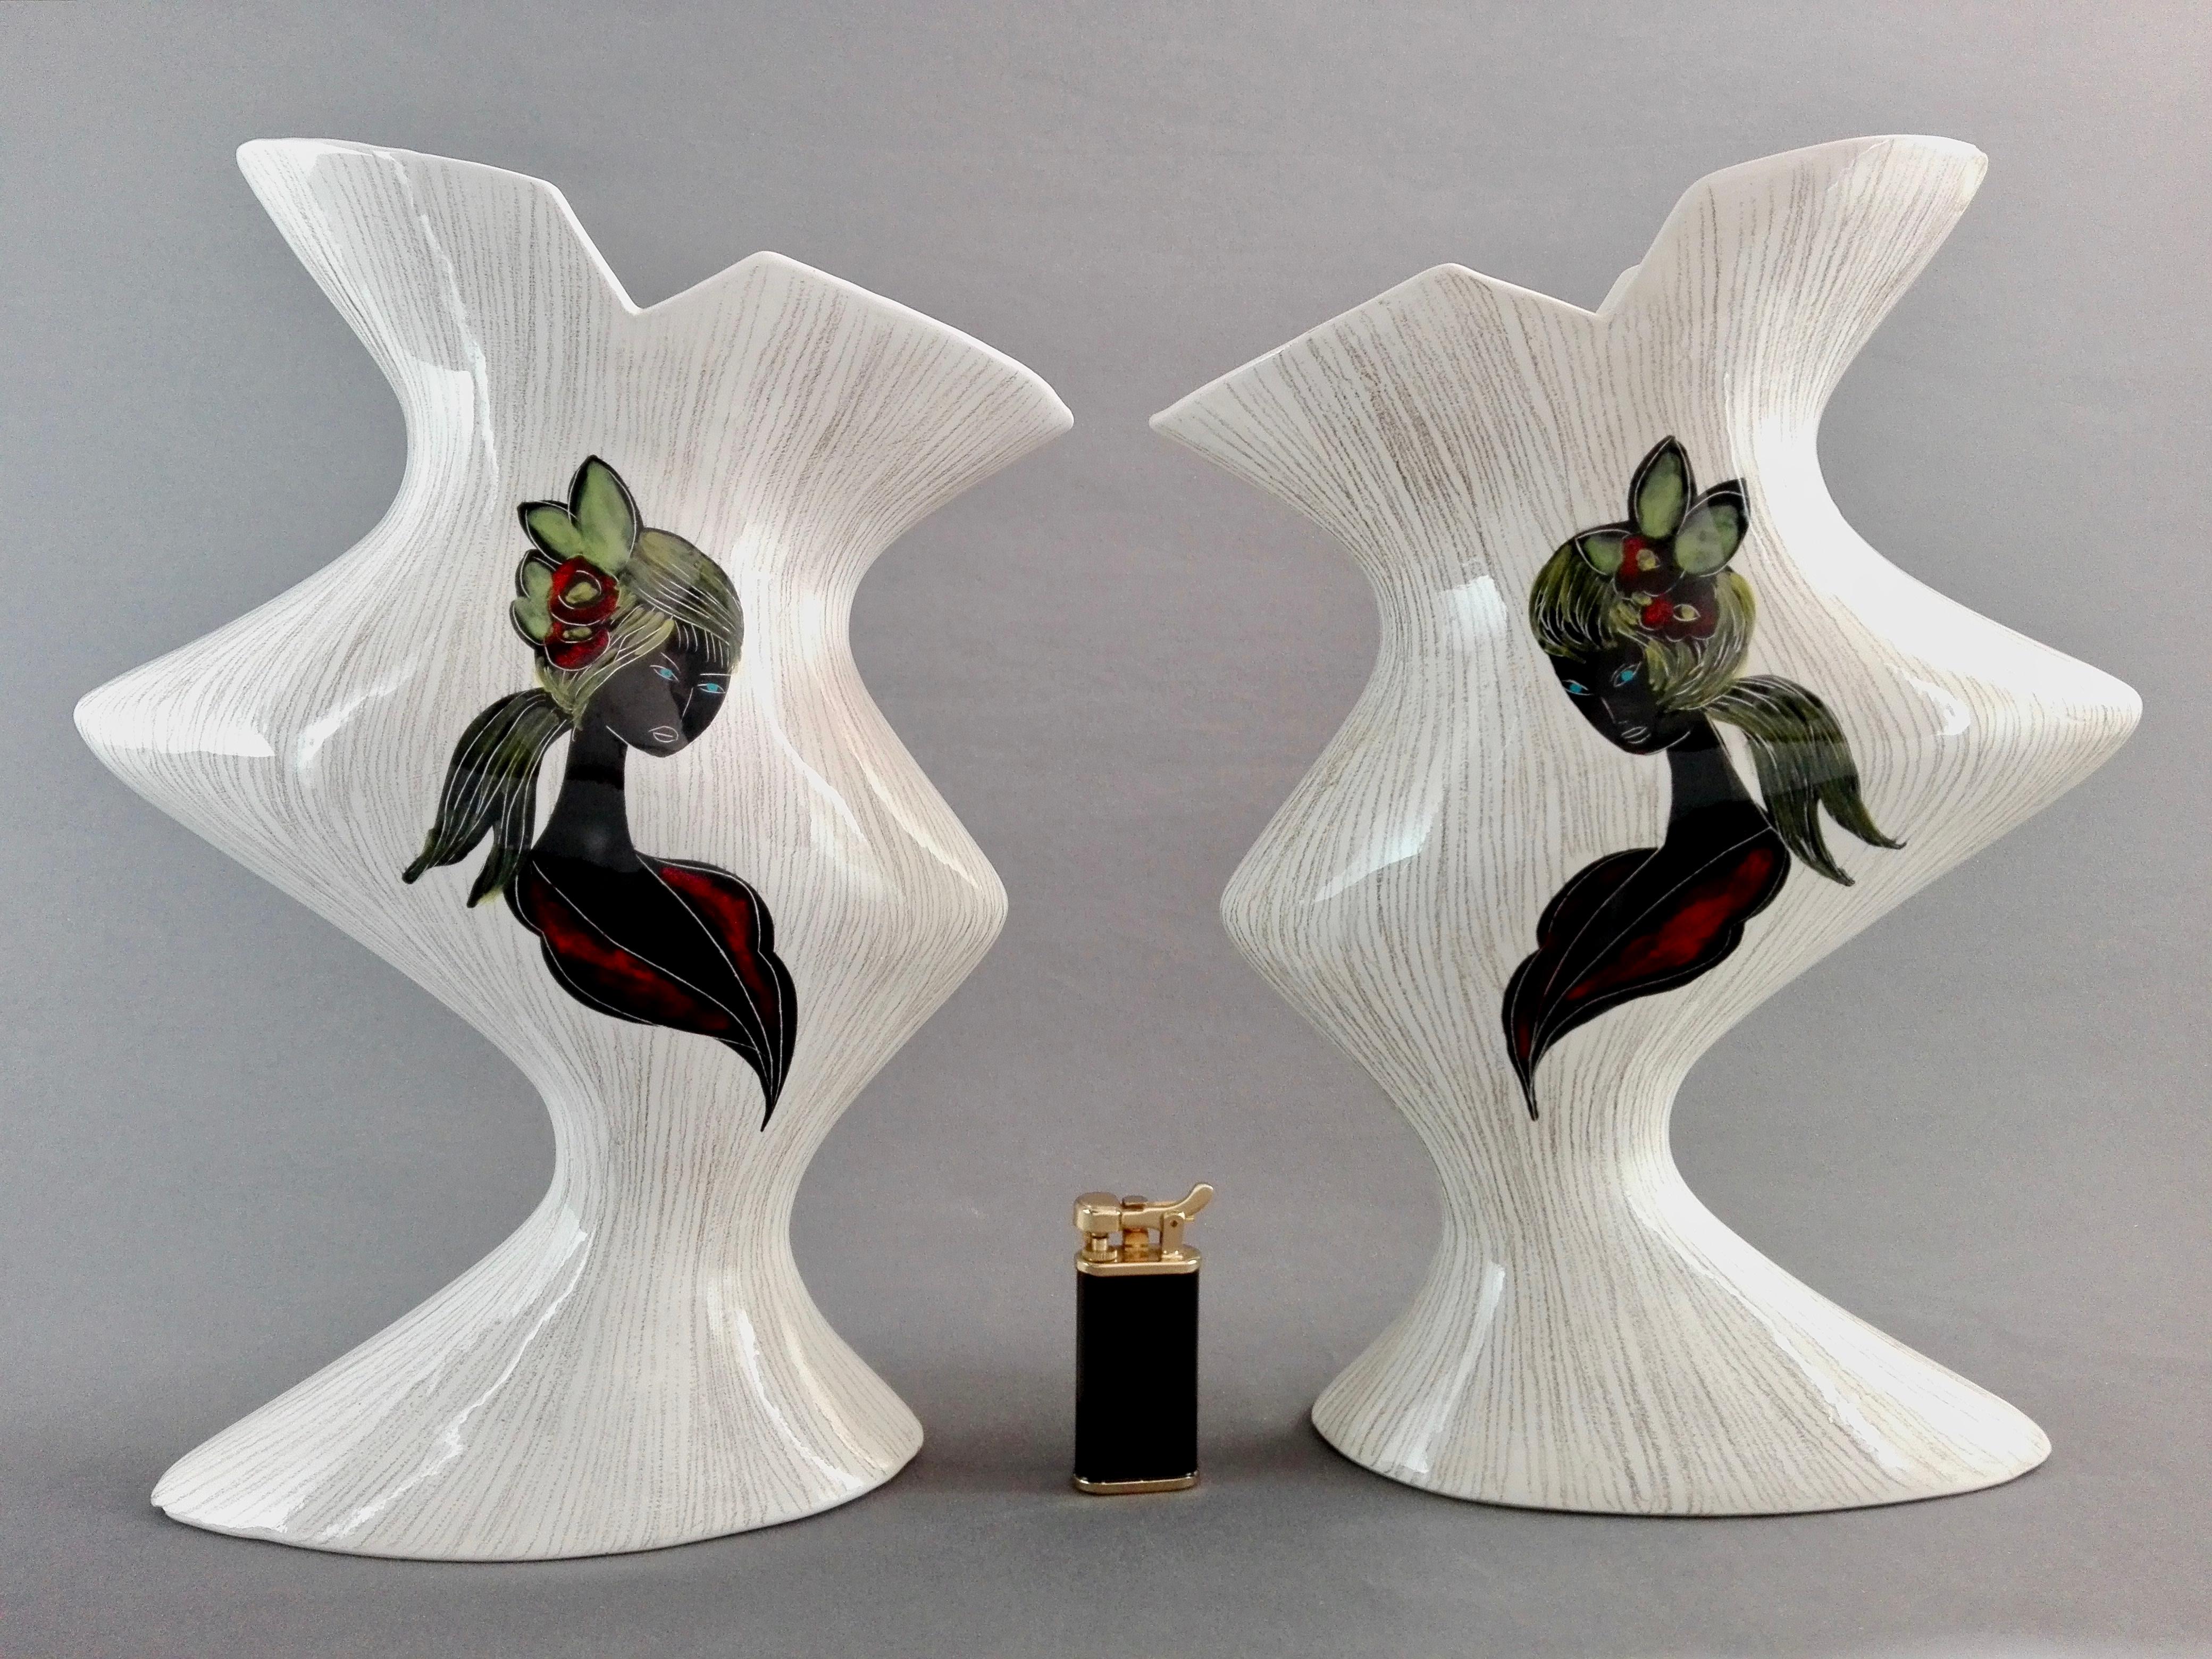 1950s Italian Ceramic Vintage Asymmetrical Decorated Vases, a Pair For Sale 7